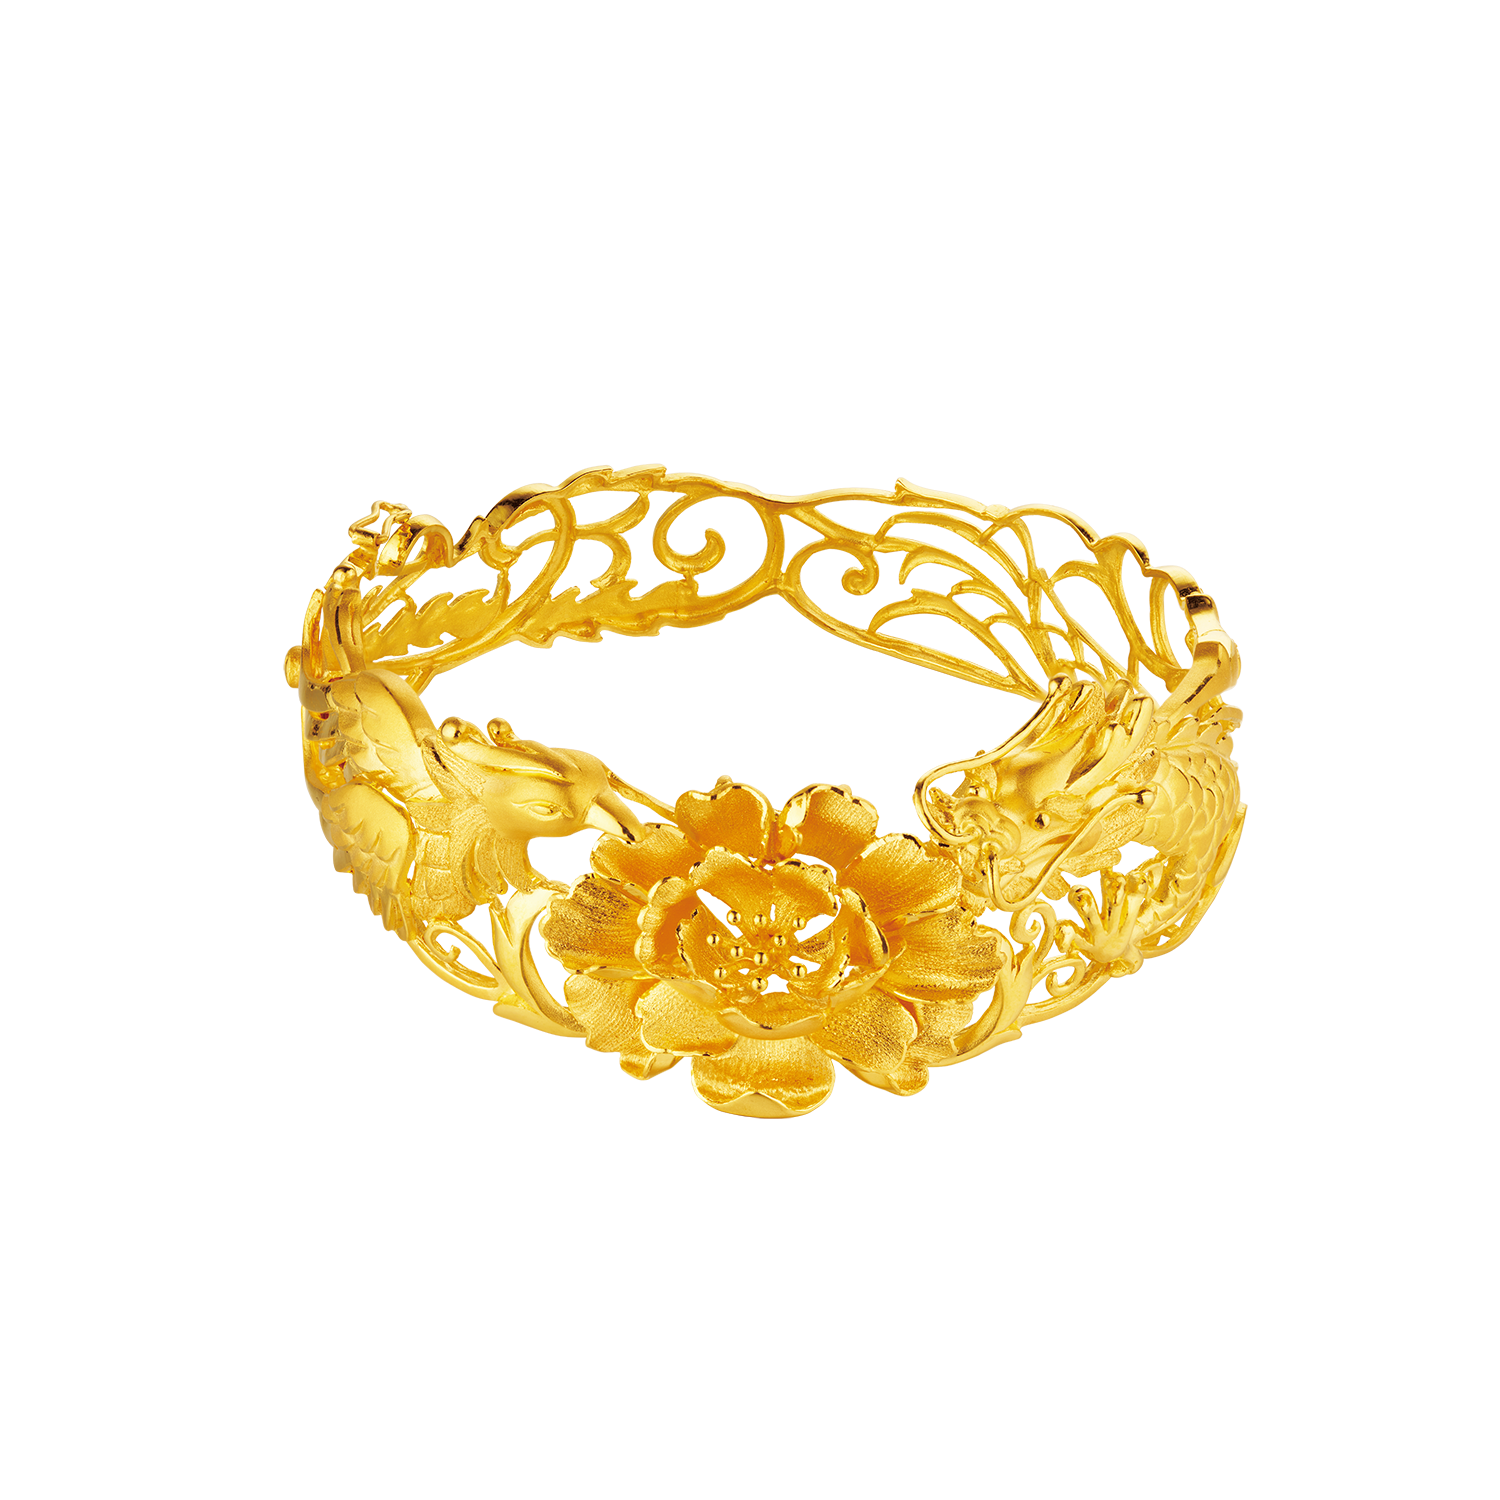 Beloved Collection "Prosperous Dragon and Phoenix" Gold Bangle